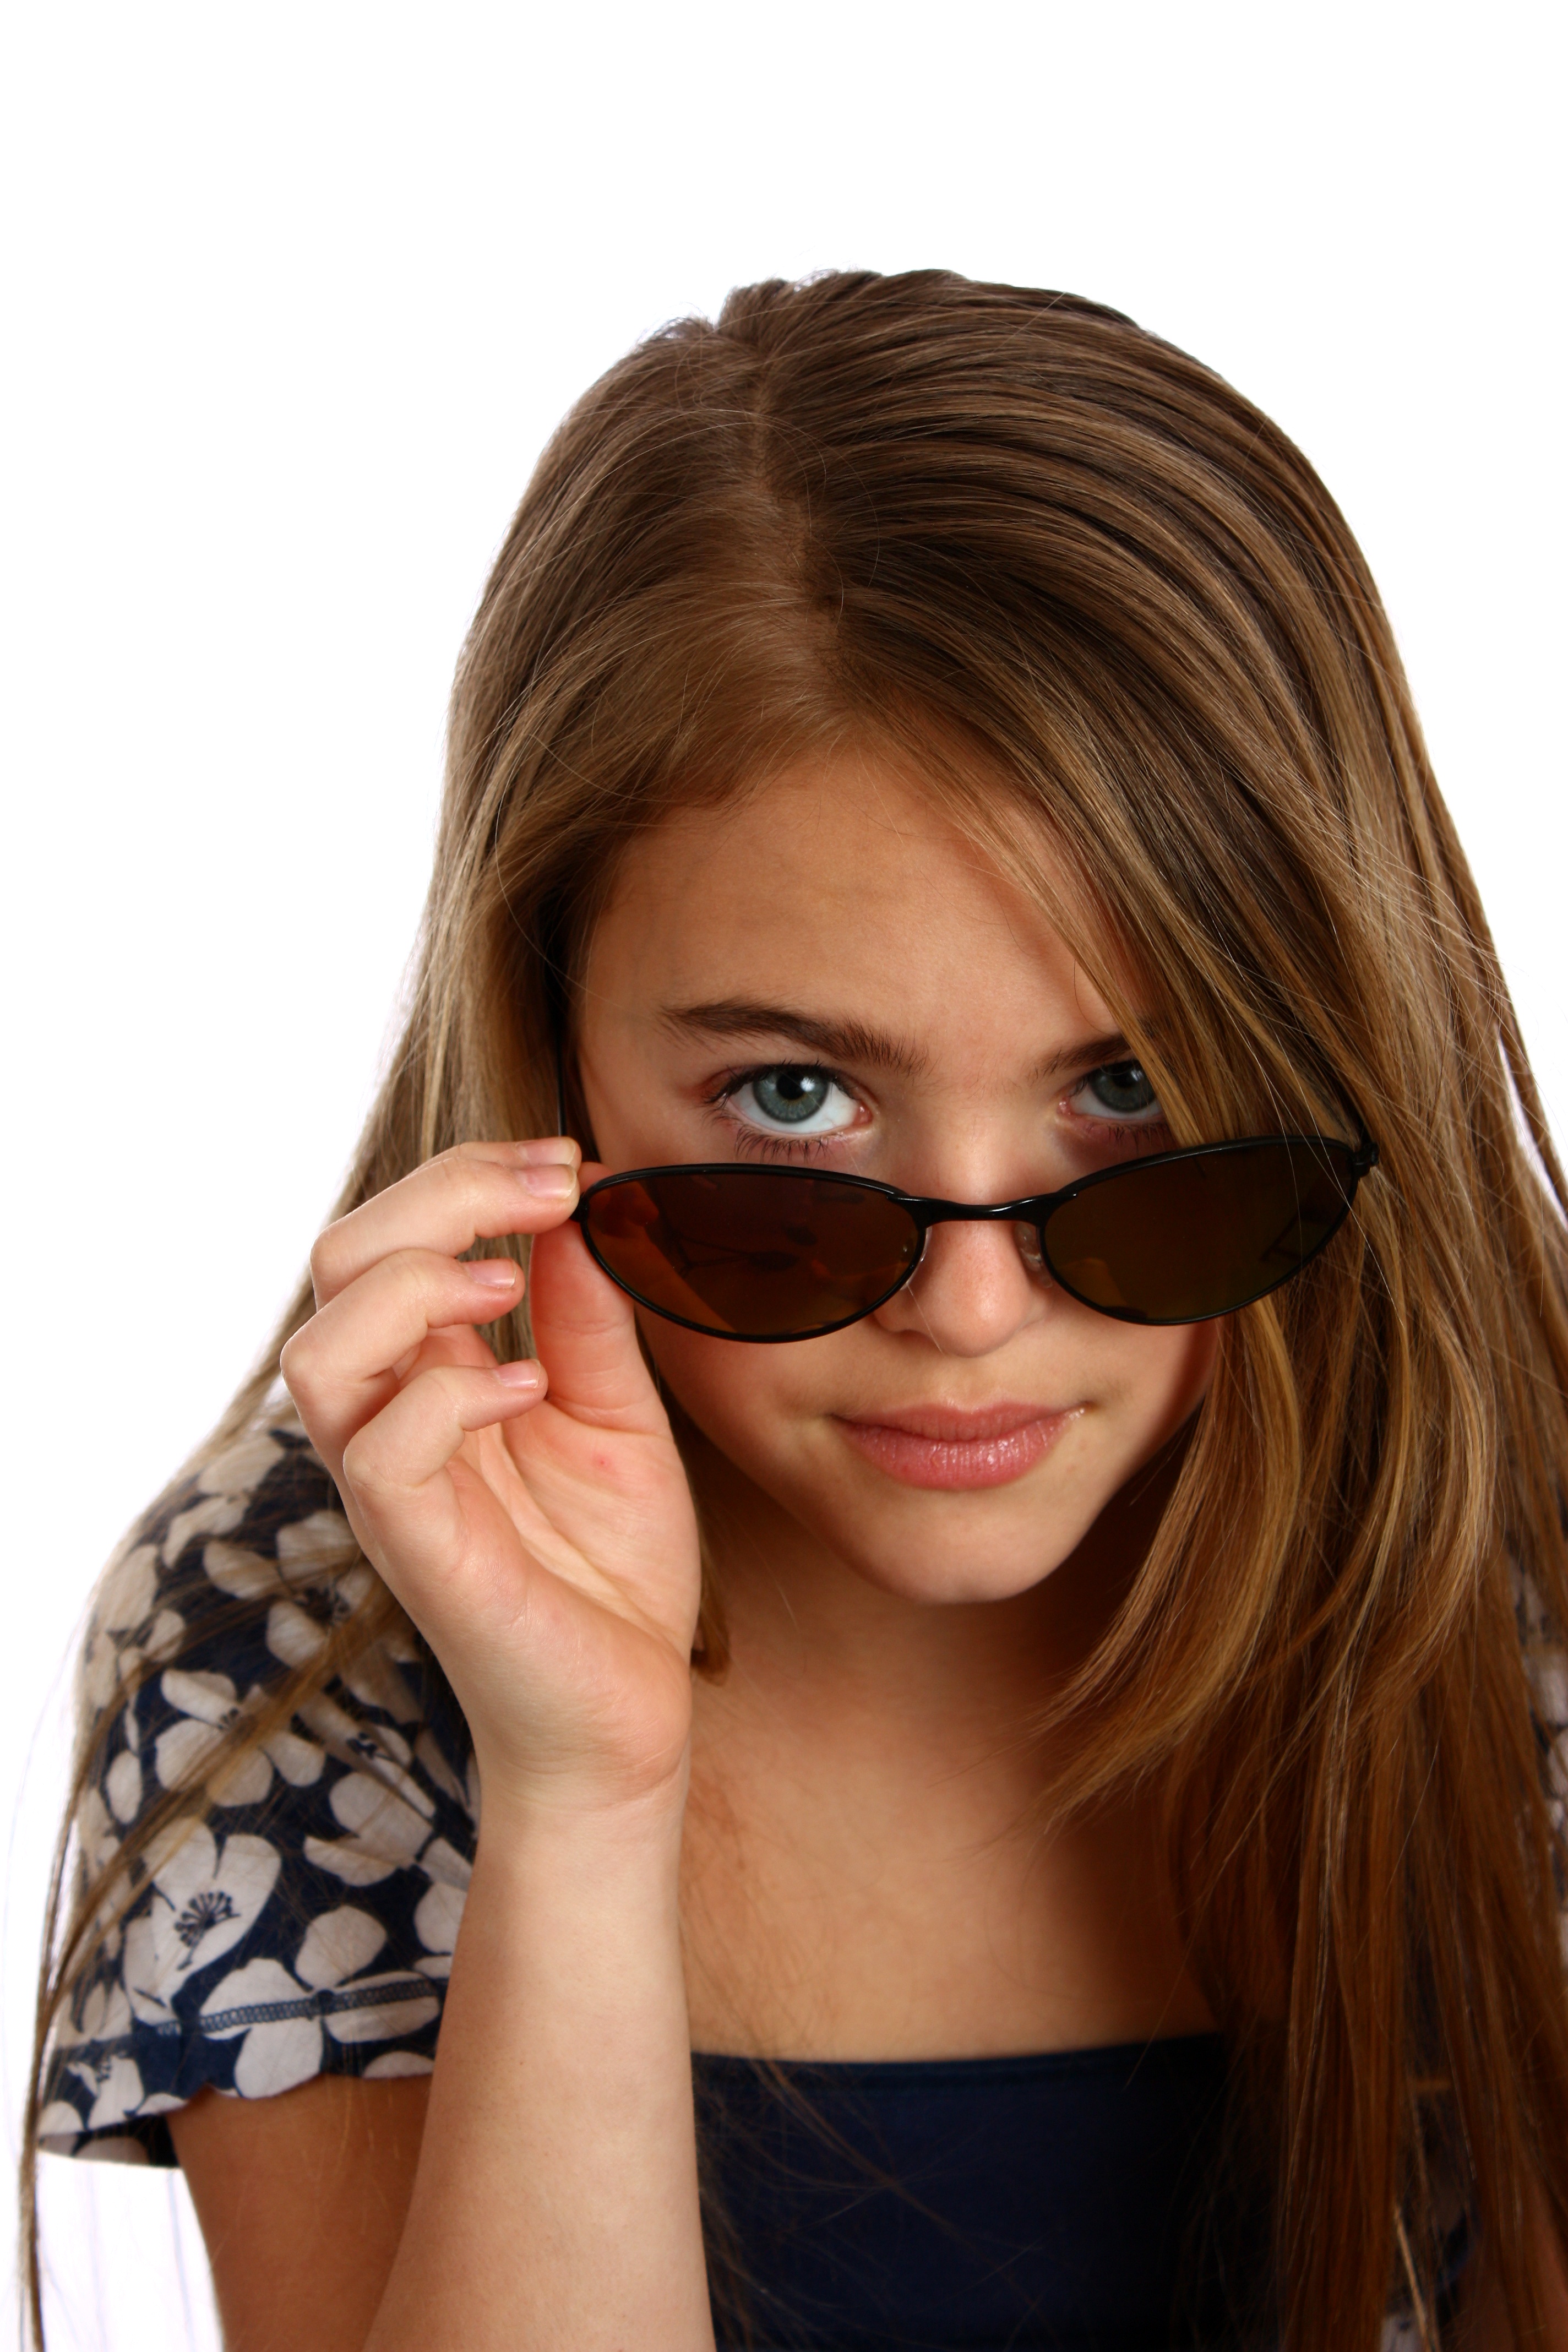 Young girl posing with sunglasses photo